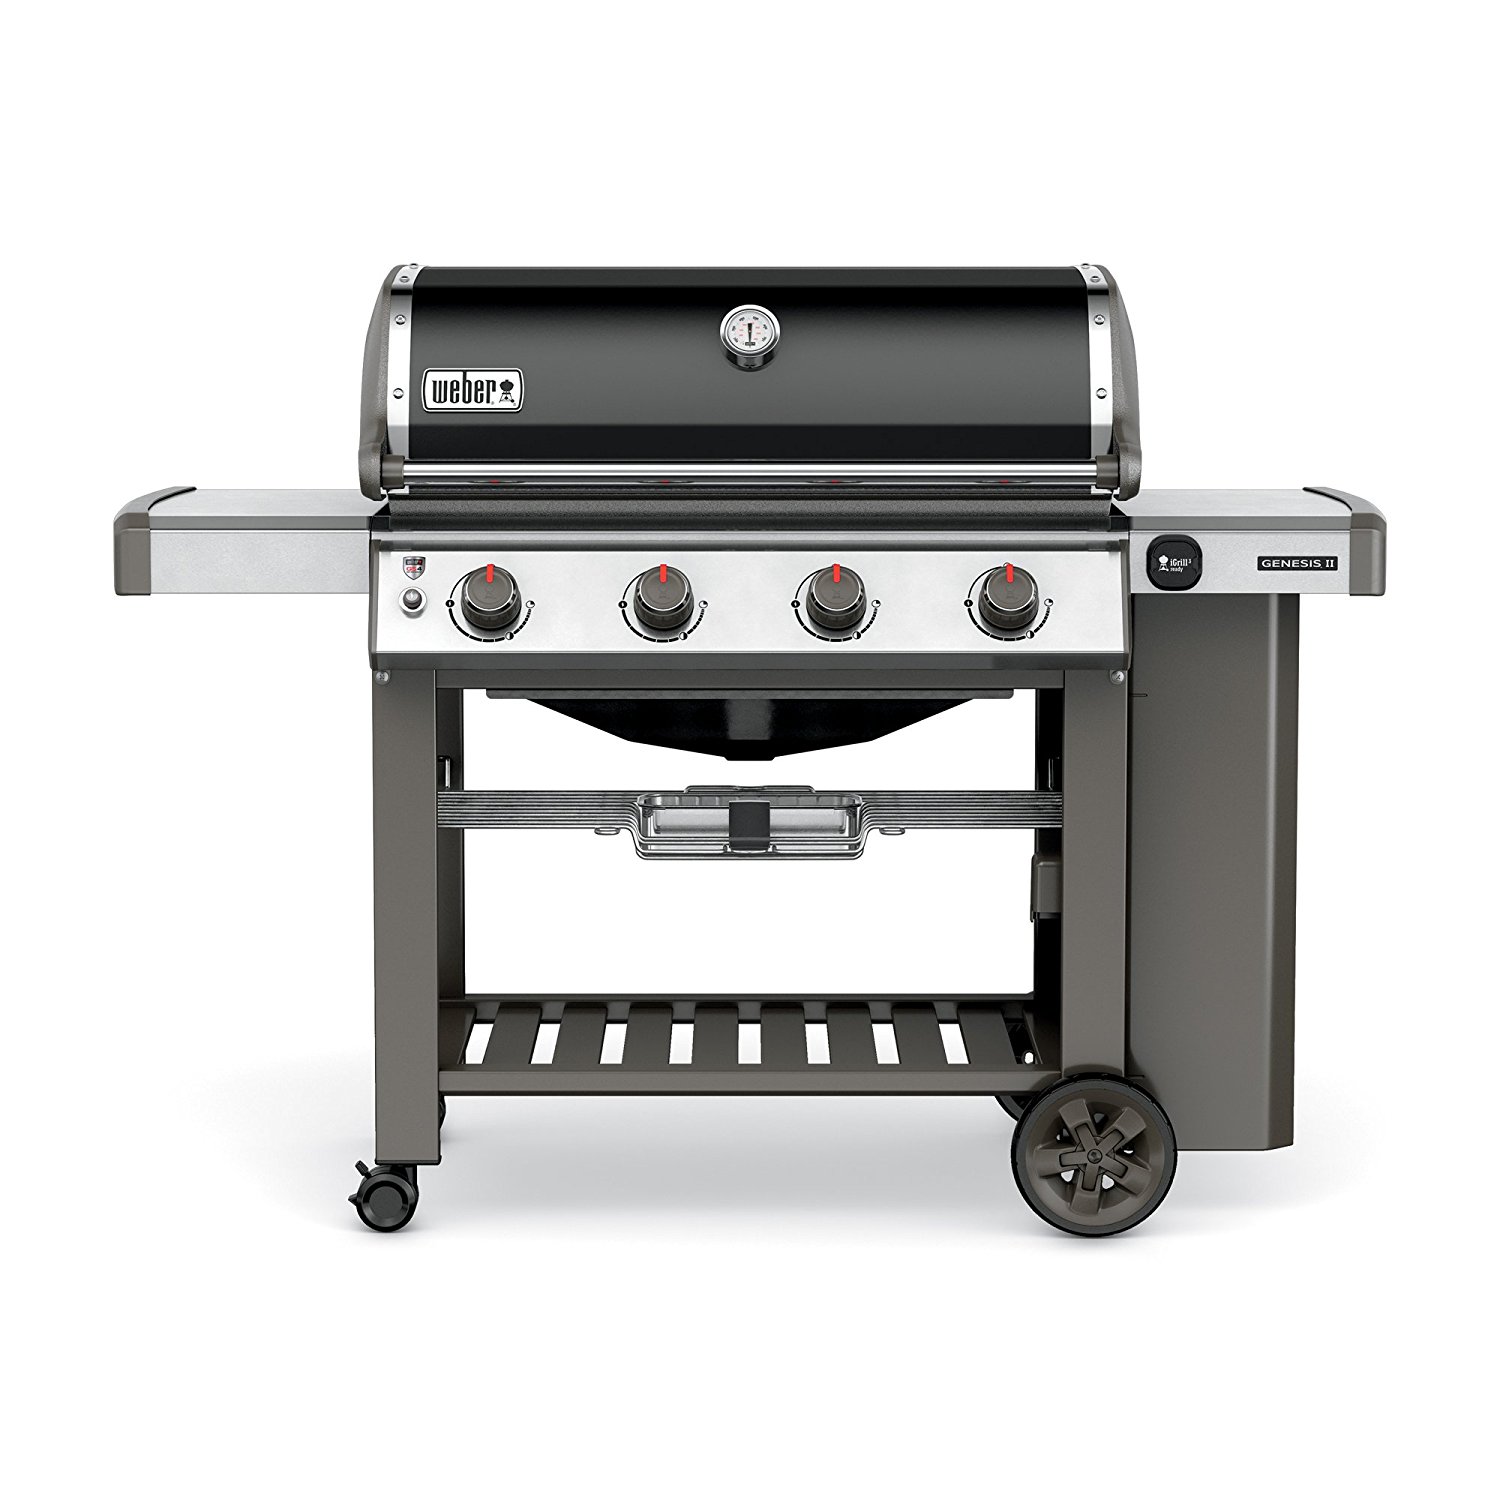 Amazon Home Service free assembly with the purchase of grills